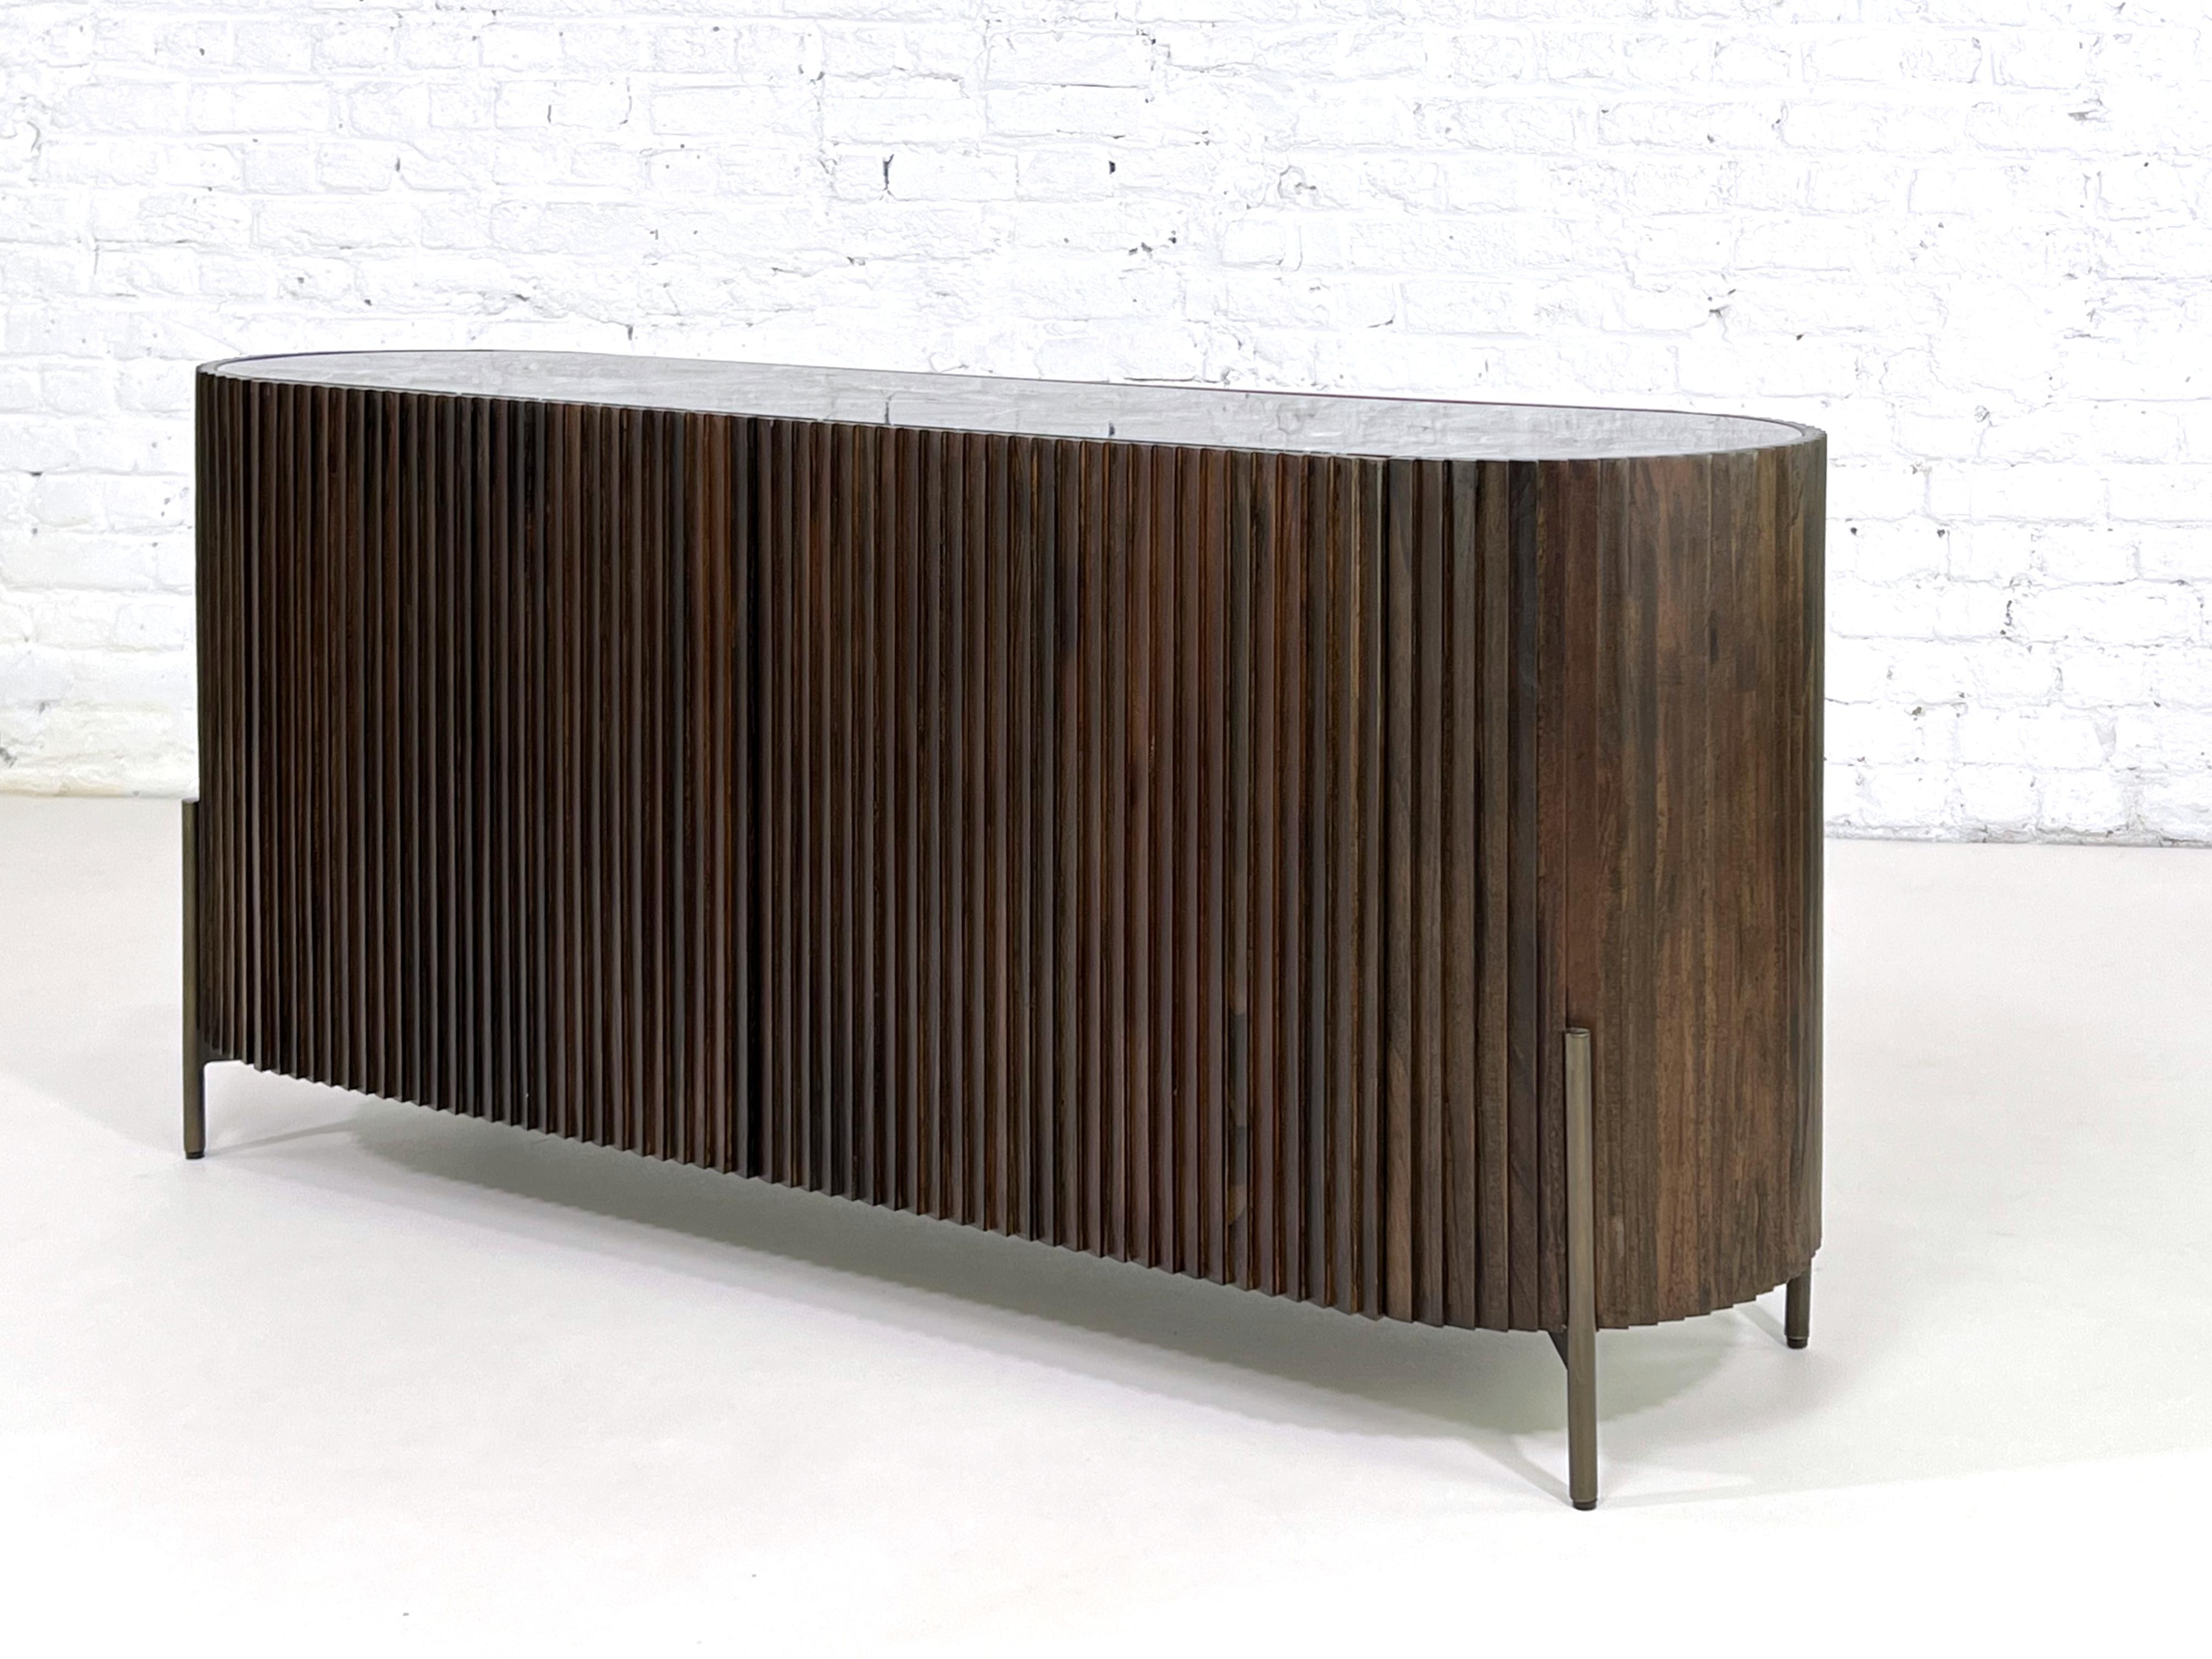 Graphic and Brutalist style Mid-Century Modern design oval shaped sideboard in wooden structure with a bevelled nero marquina marble stone top and brush brass legs finishes.